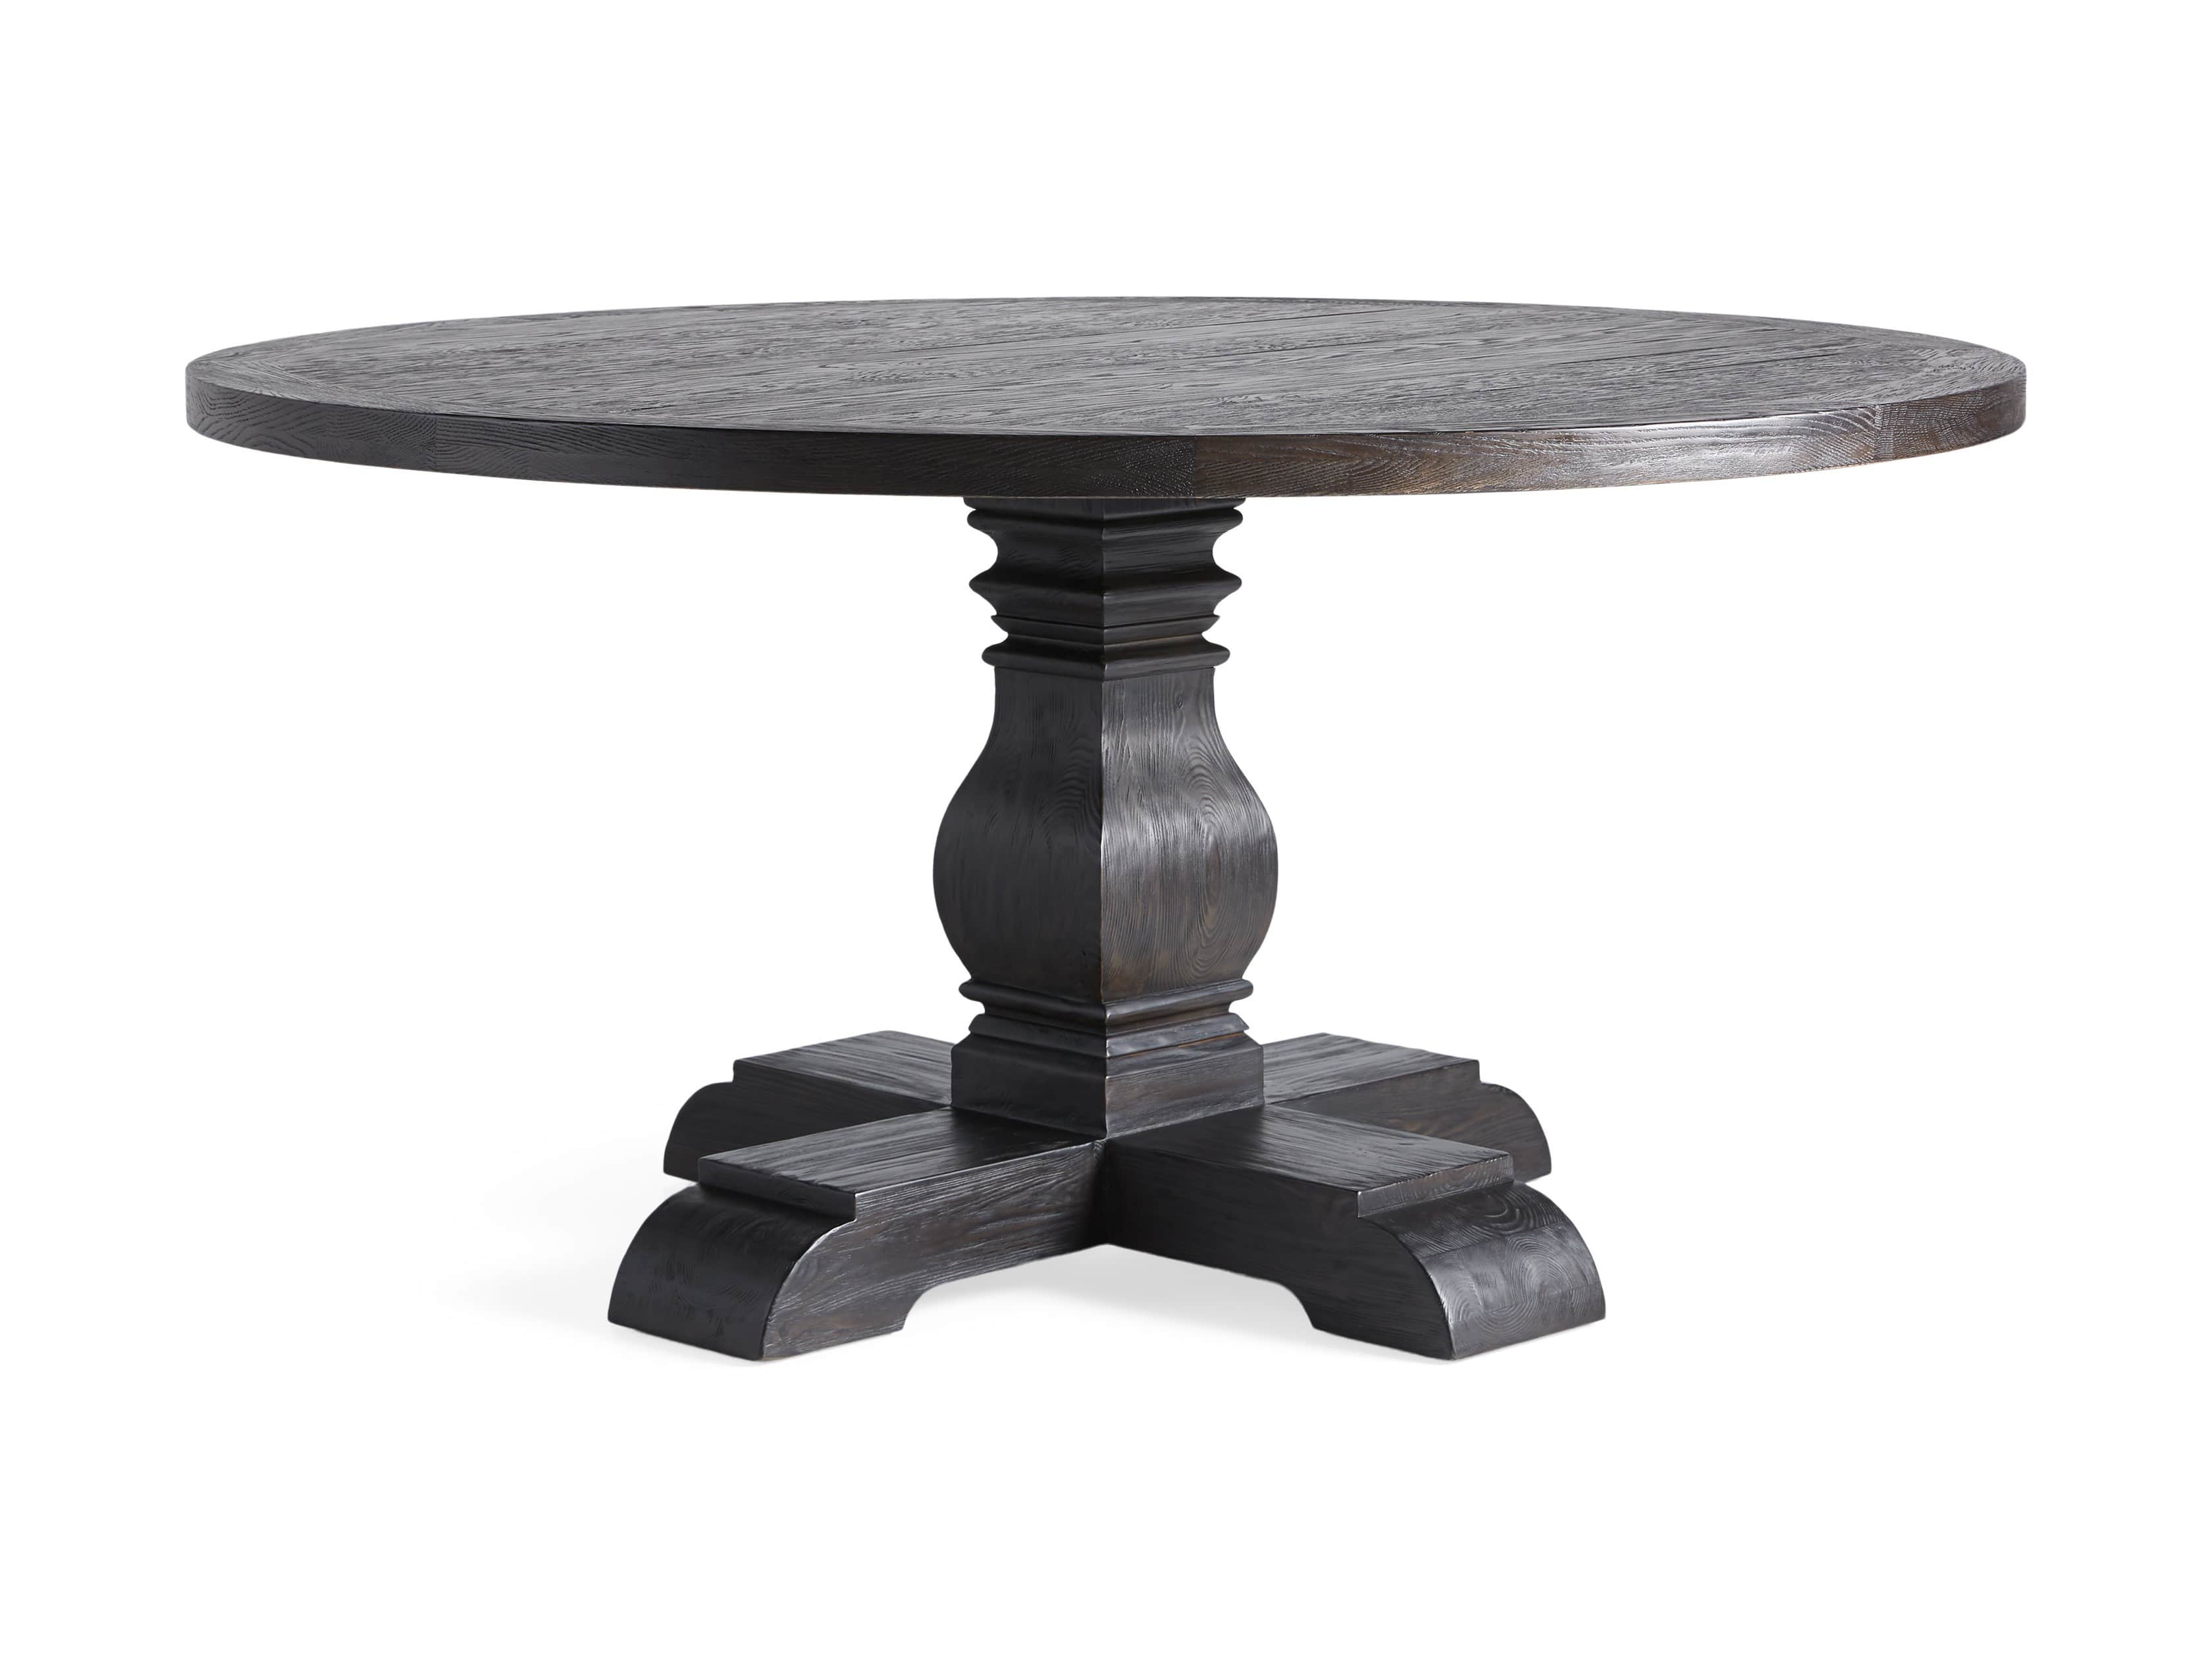 Kensington Round Dining Table Arhaus, What Size Rug For A 60 Round Dining Table